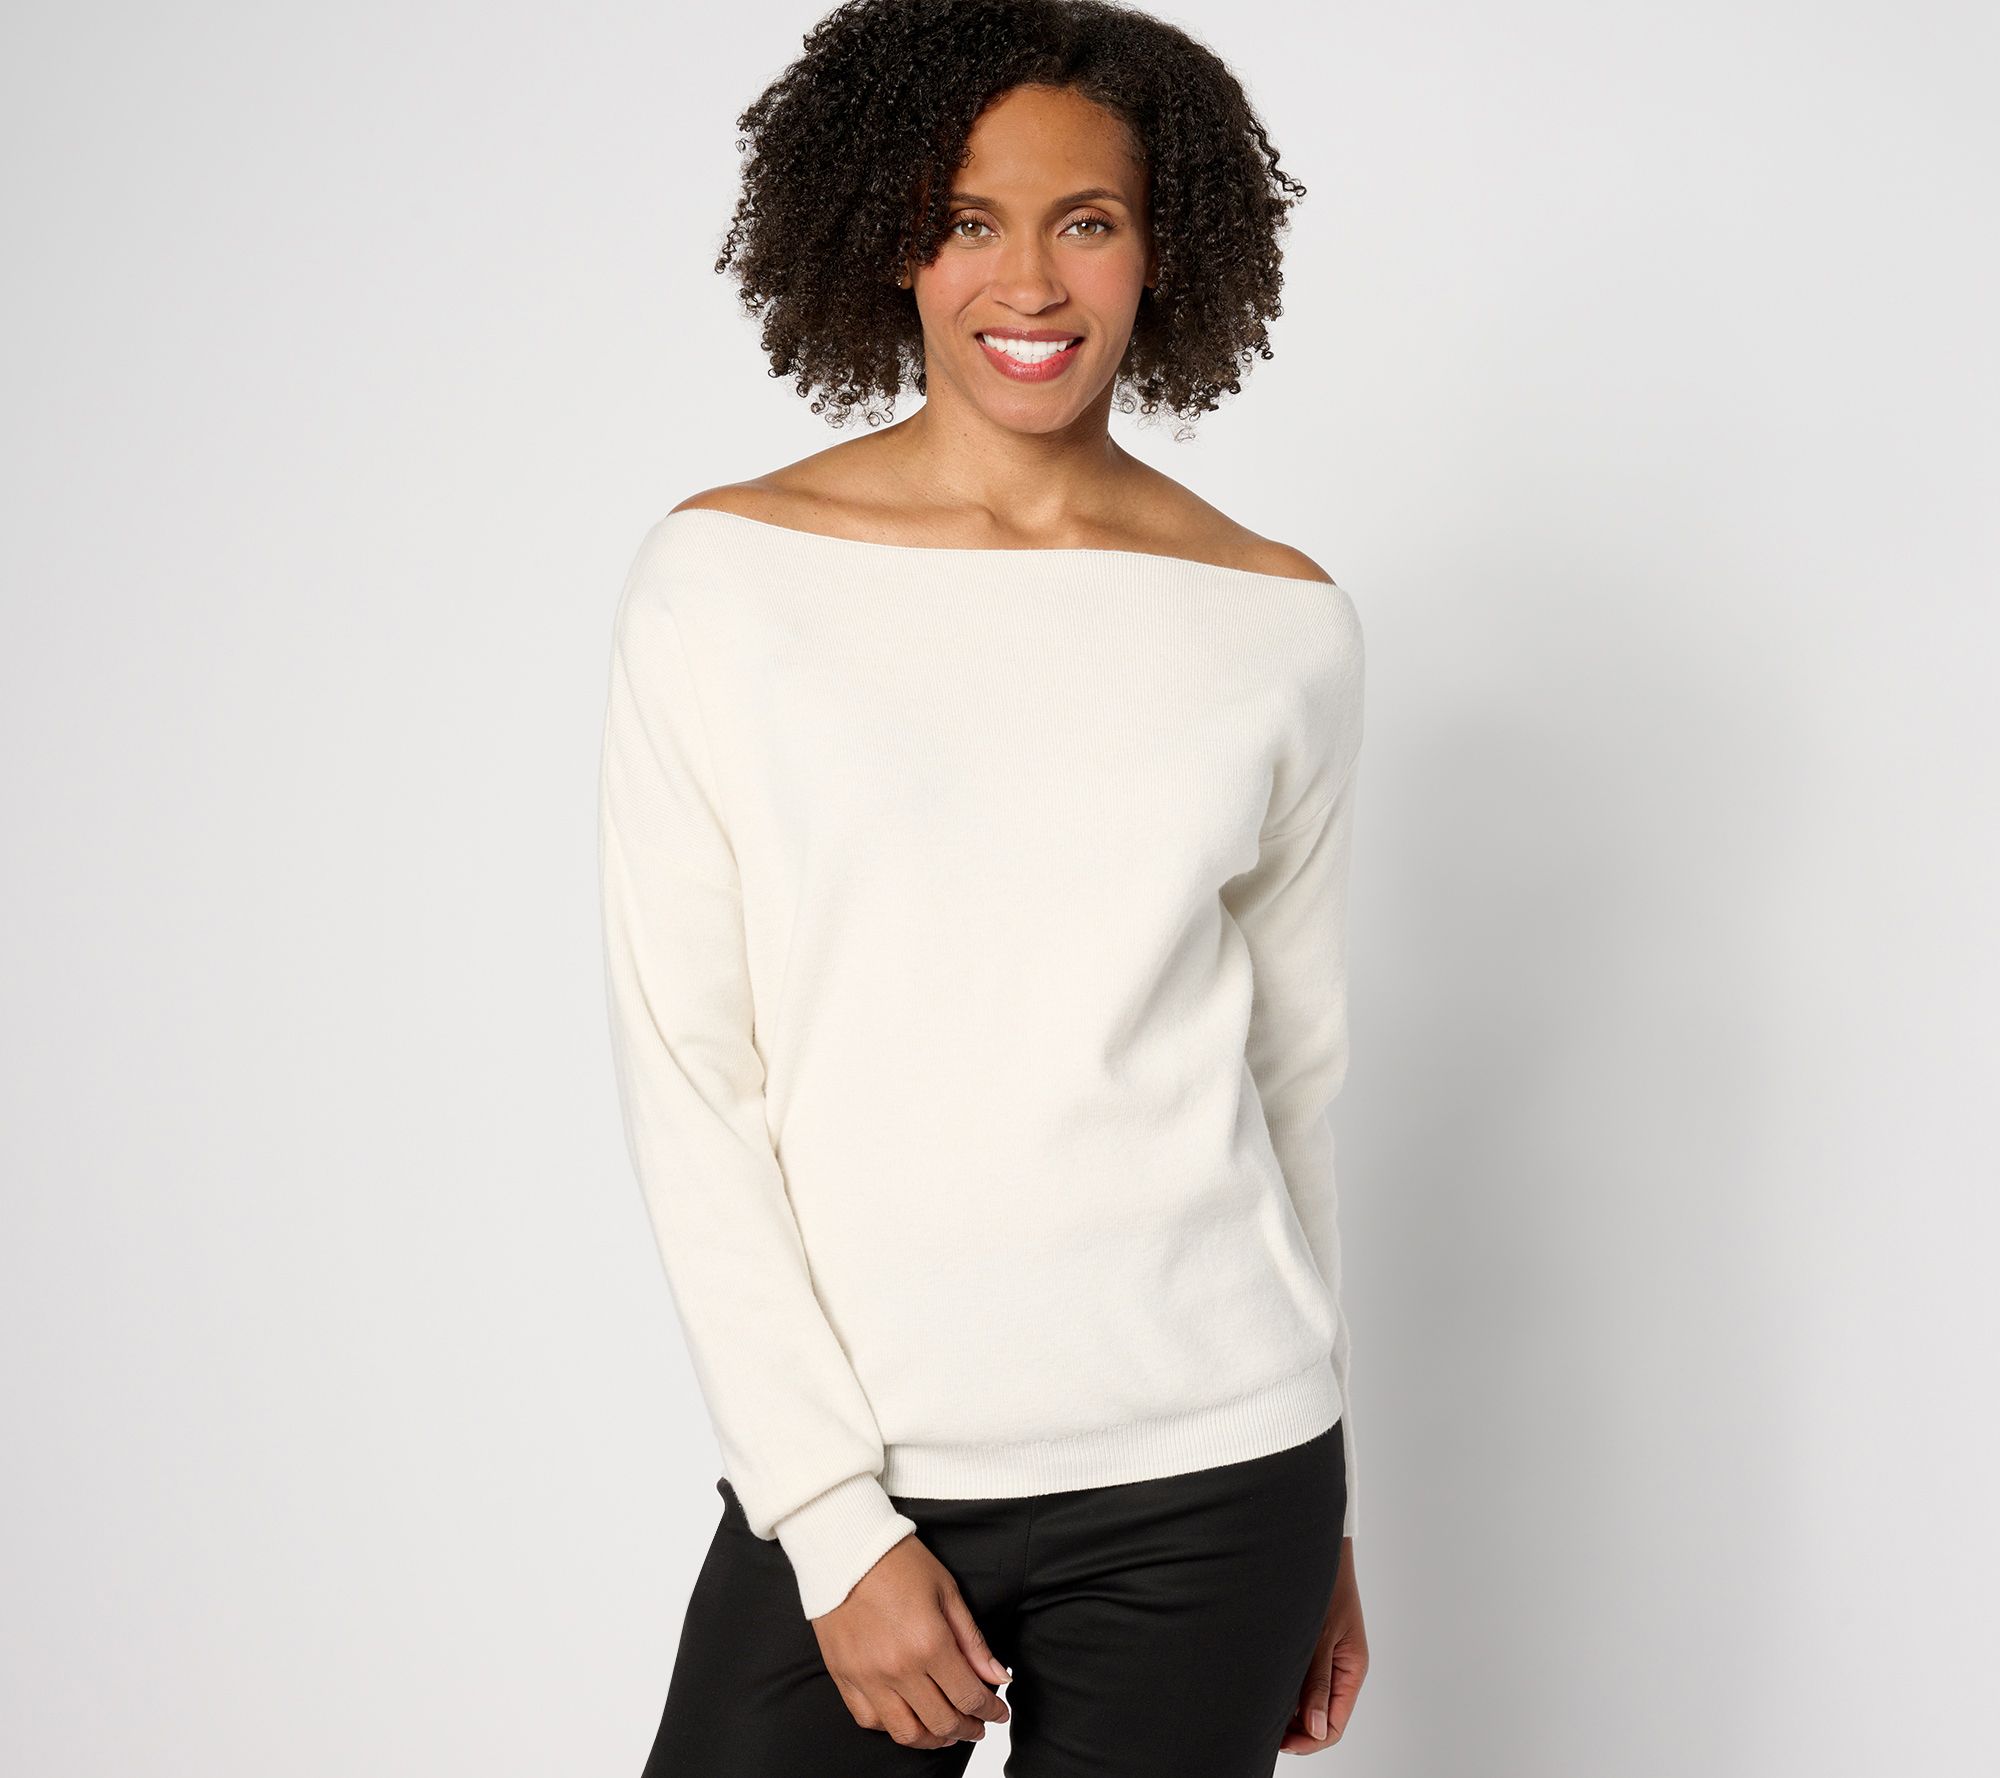 Draped Top with Shoulder Pads - Cream - Ladies